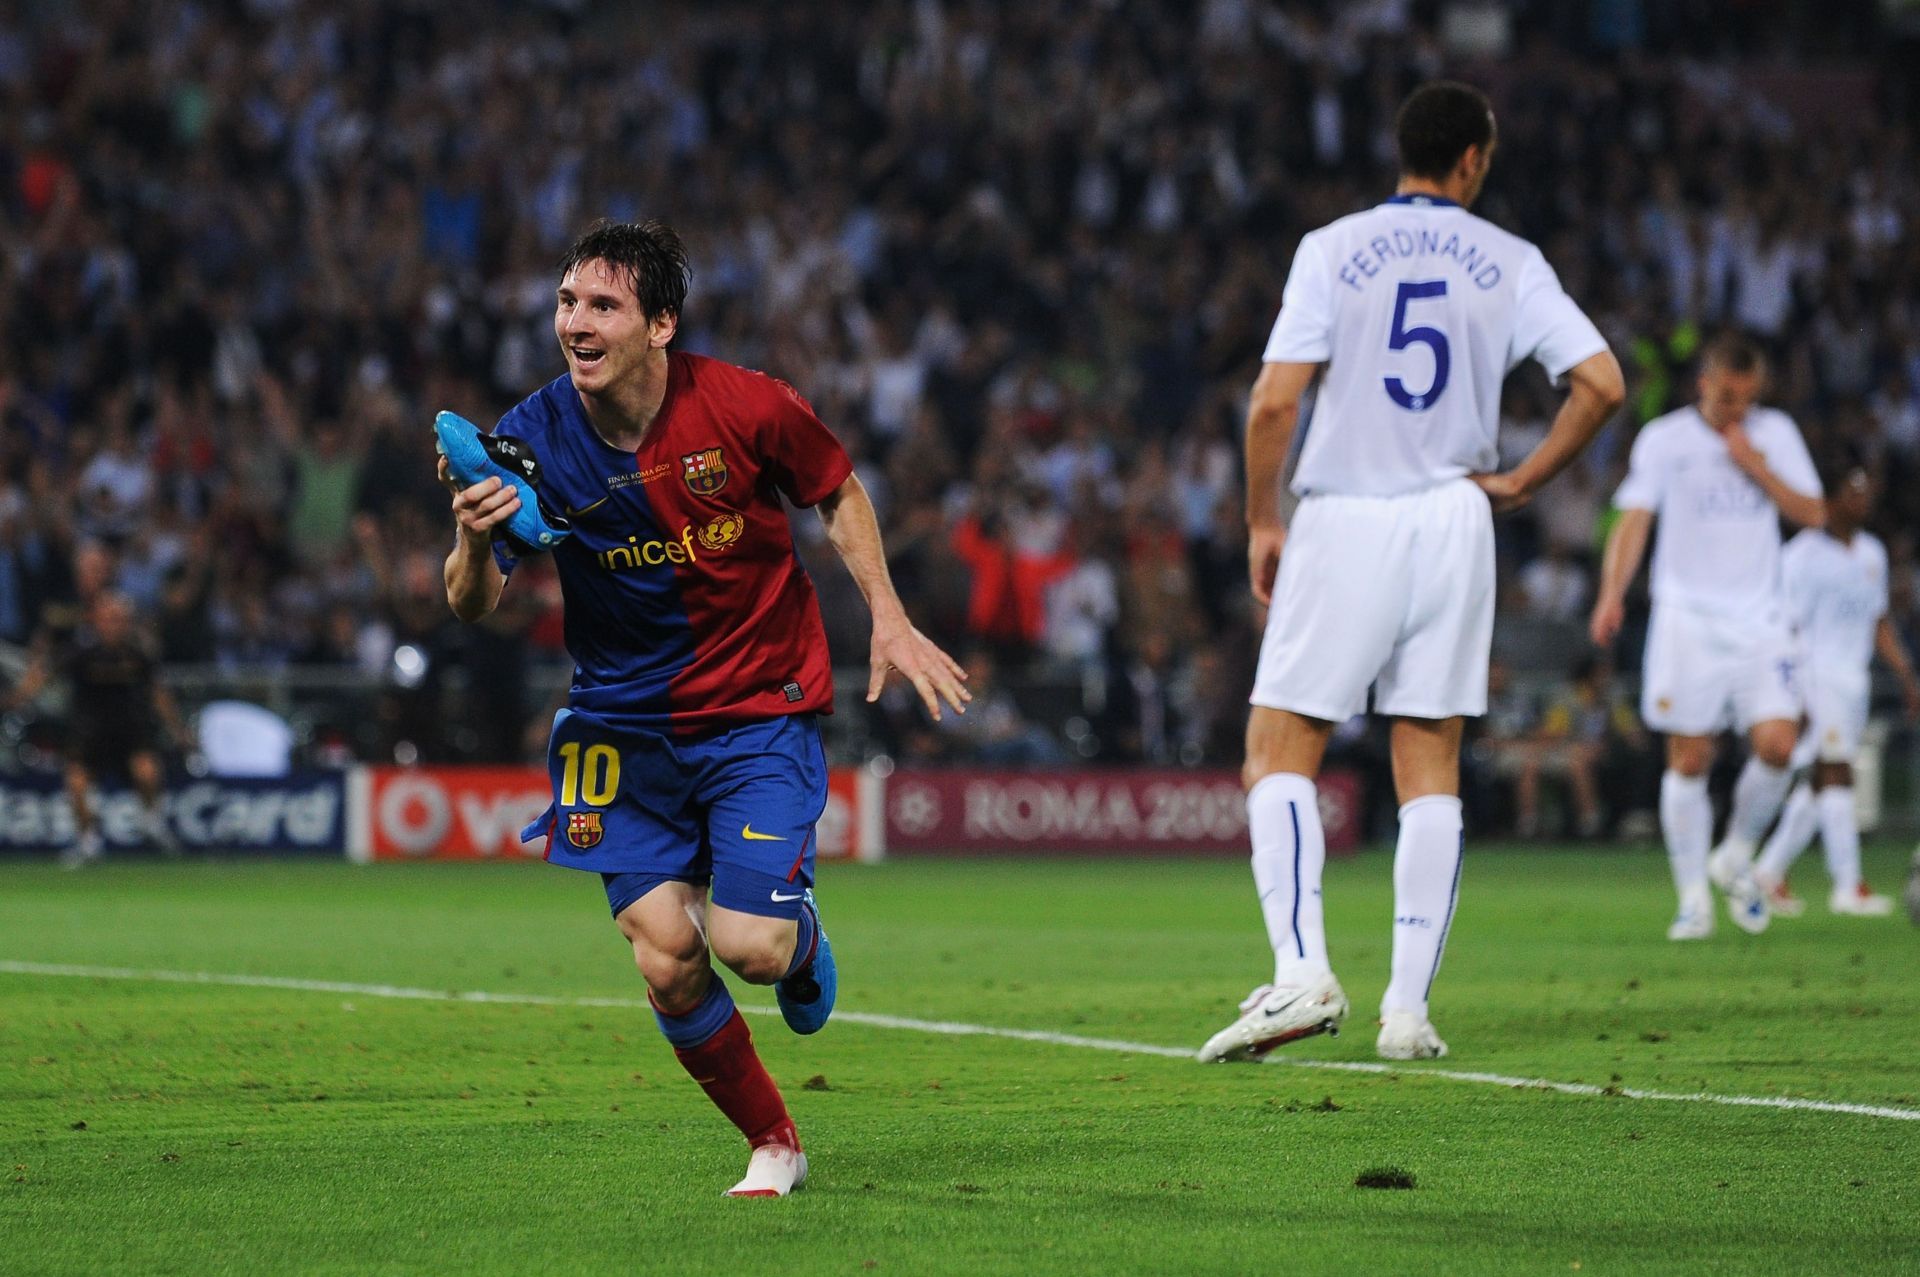 Lionel Messi scored a memorable goal against Manchester United in 2009.